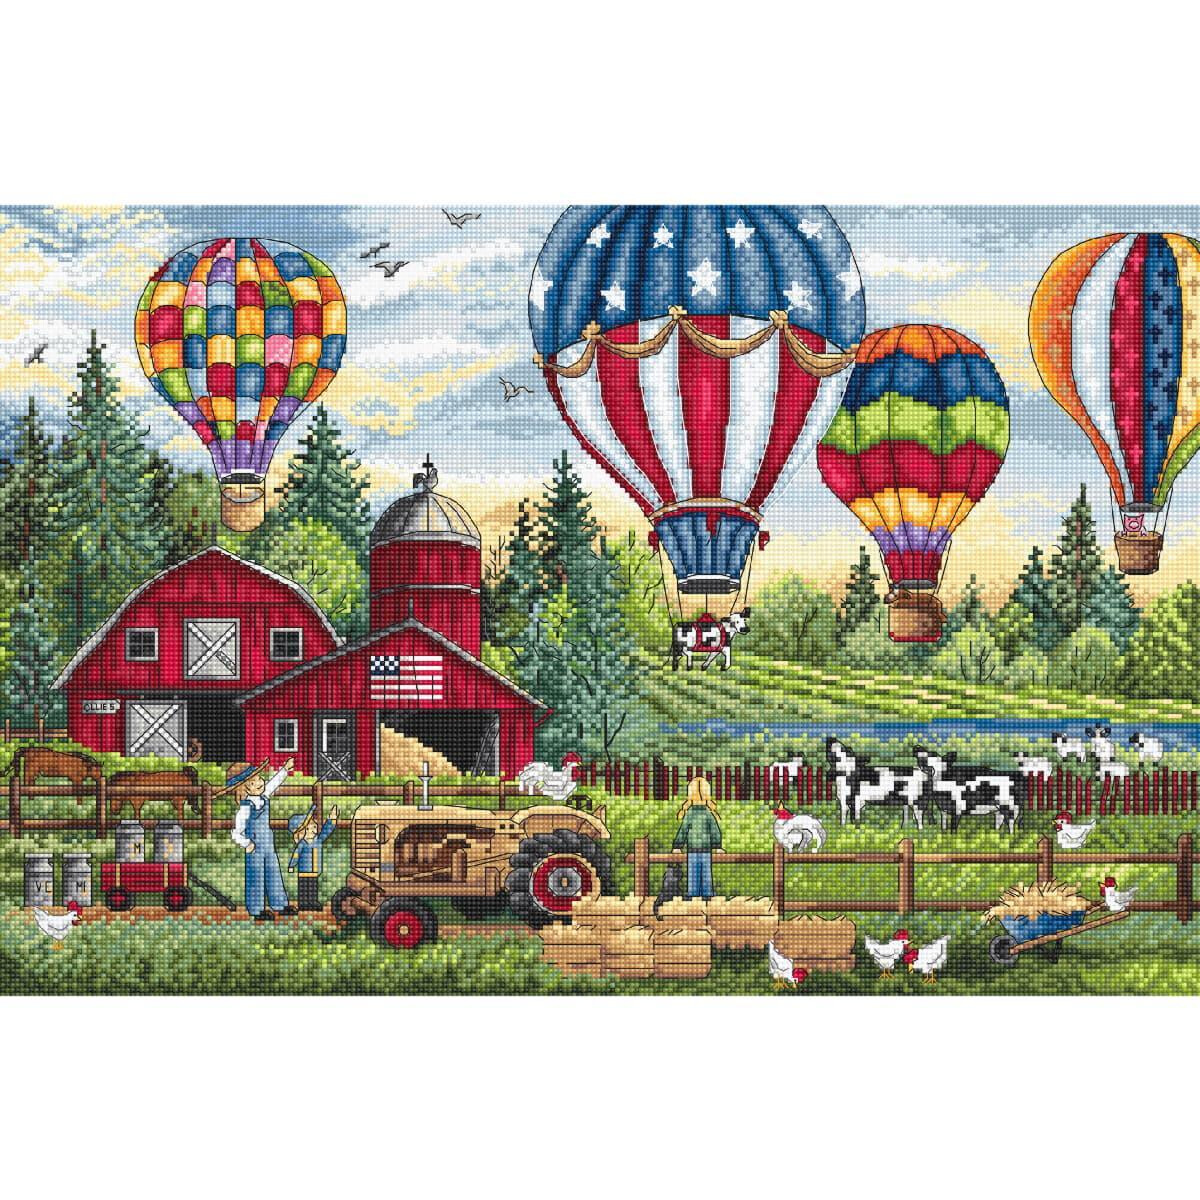 A lively landscape scene with colorful hot air balloons...